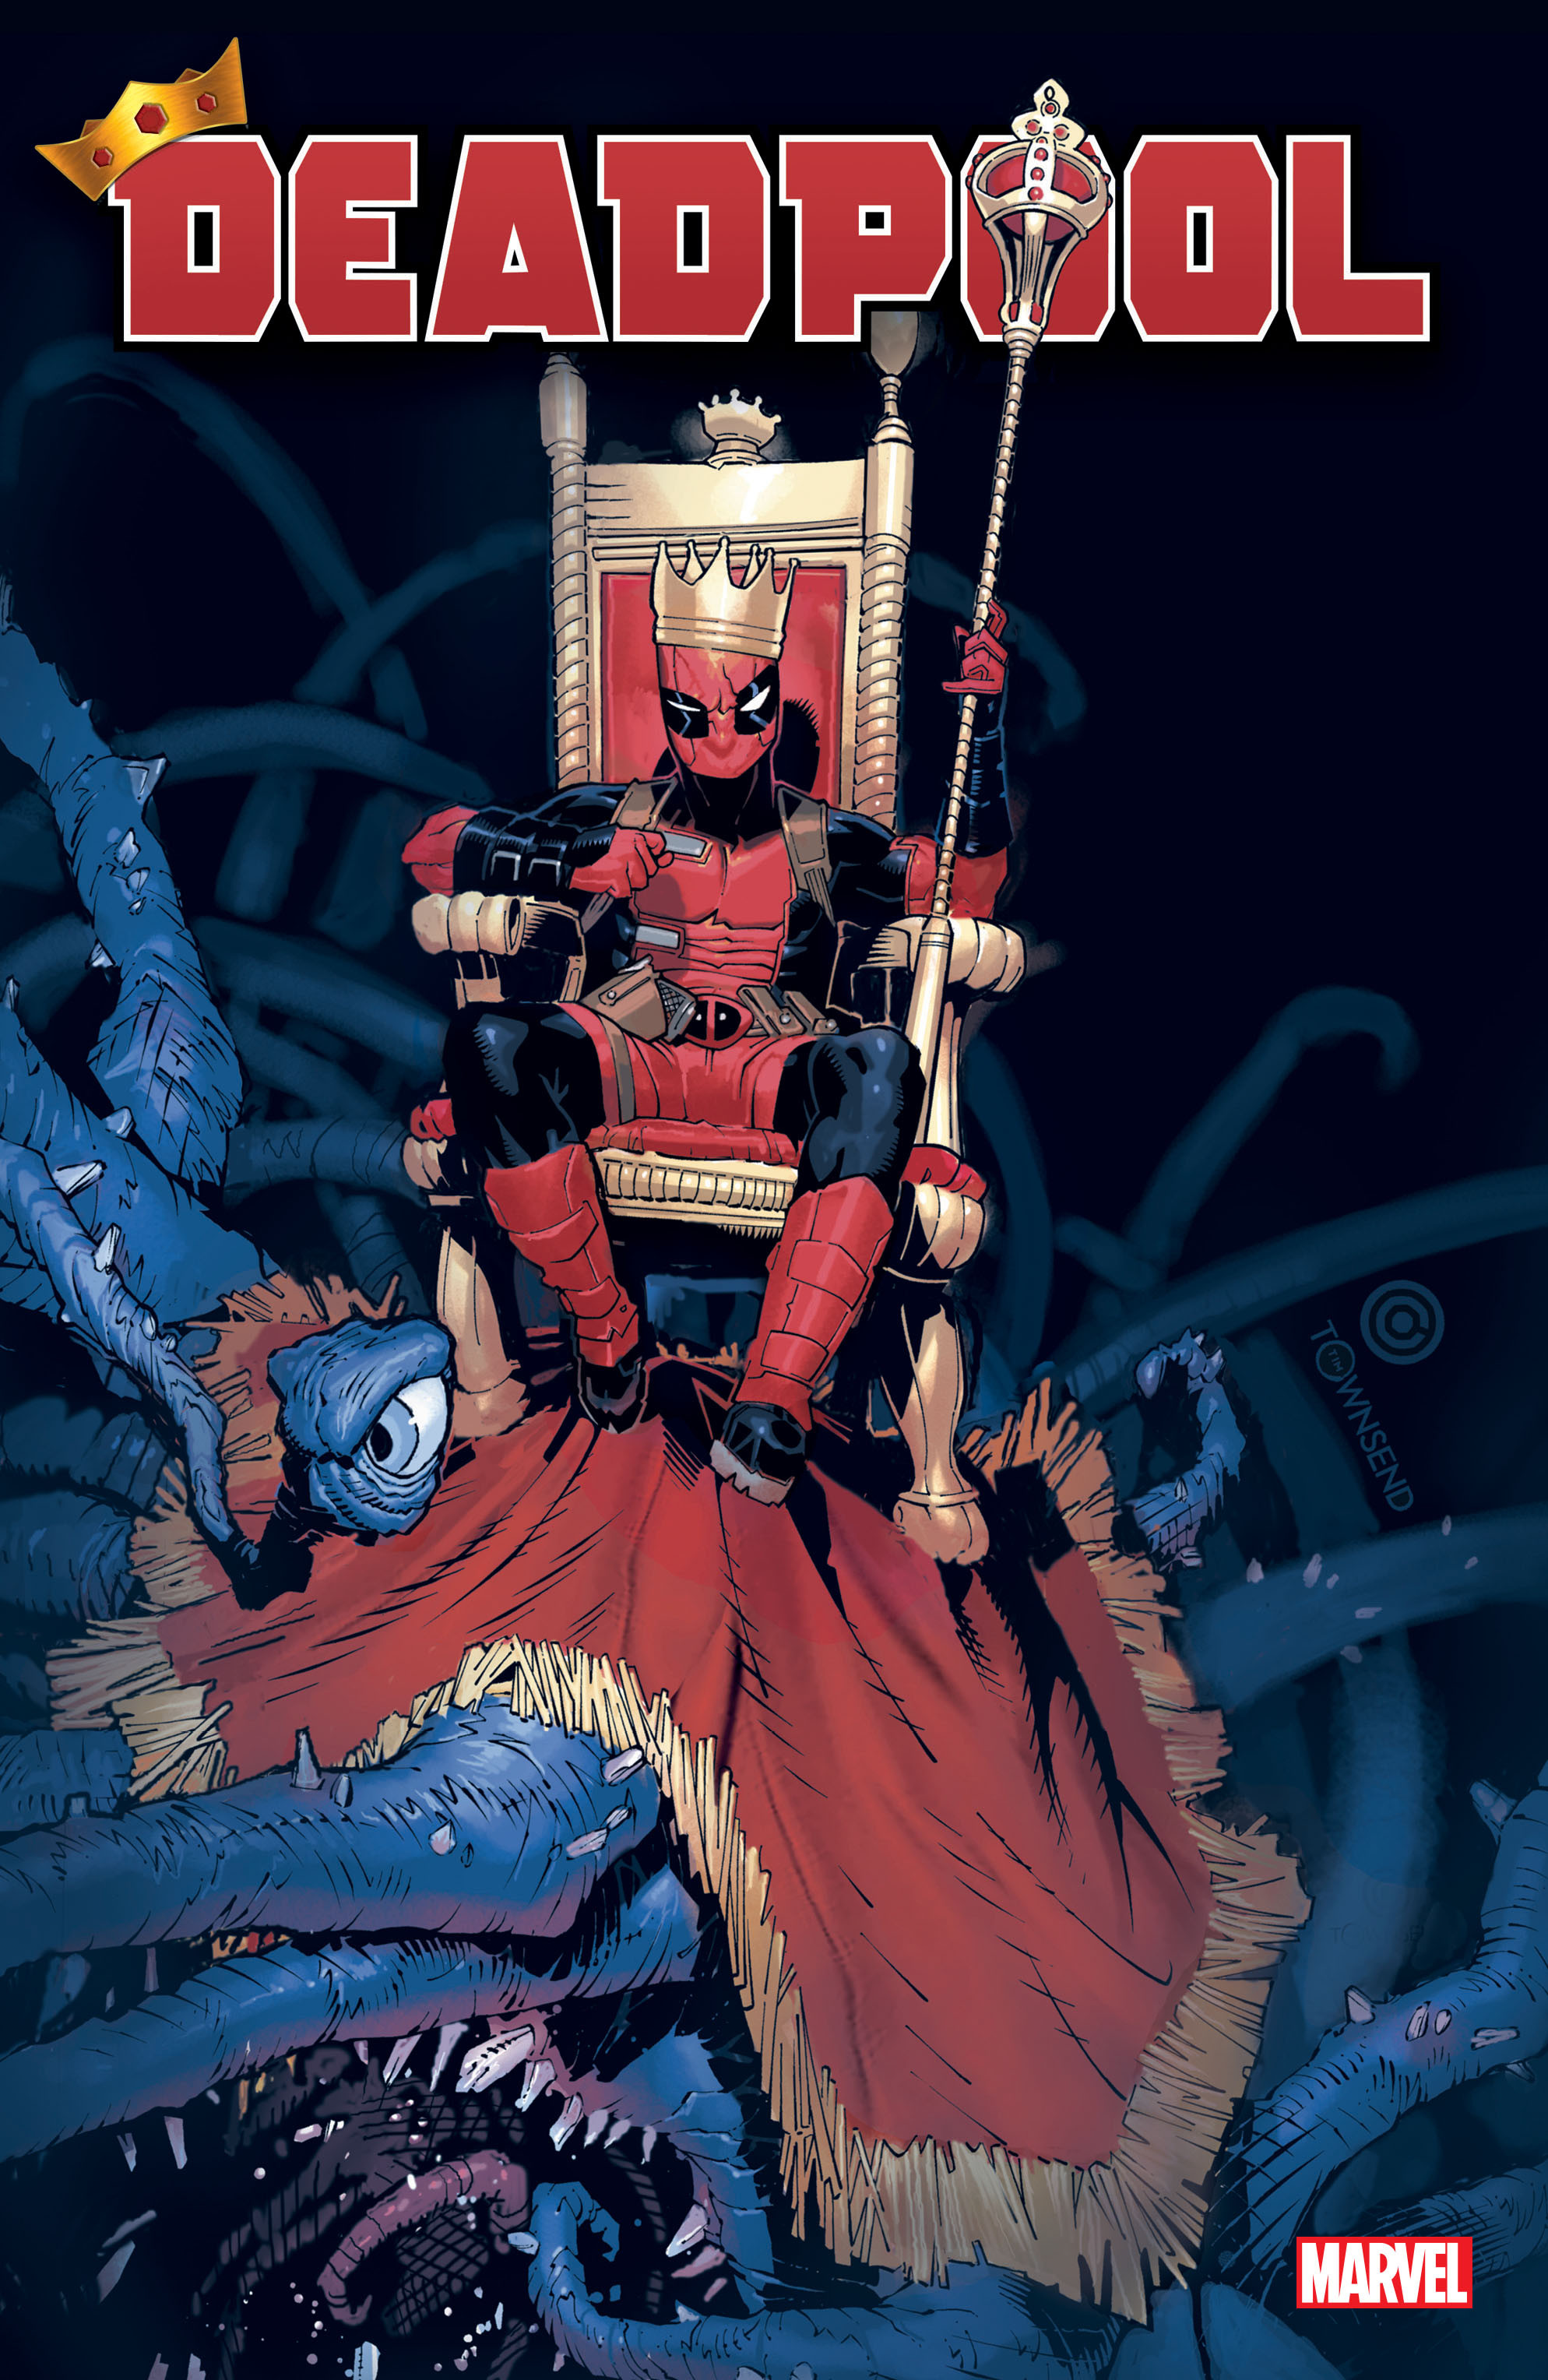 King Deadpool #1 Cover. Published by Marvel Entertainment